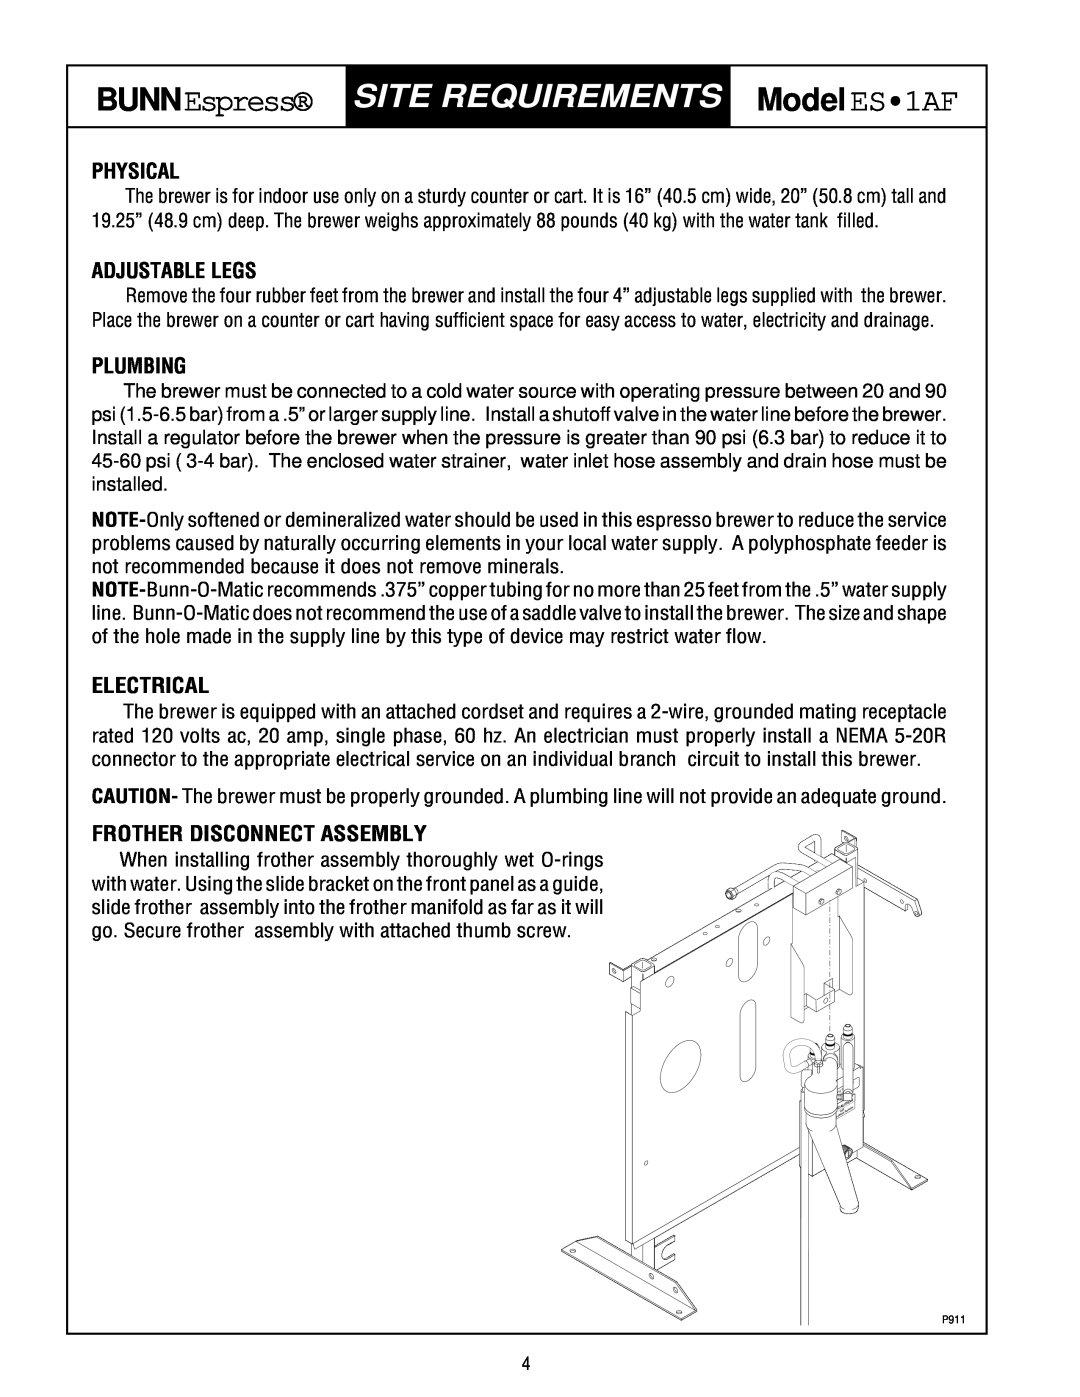 Bunn ES.1AF Site Requirements, Physical, Adjustable Legs, Plumbing, Electrical, Frother Disconnect Assembly, BUNNEspress 